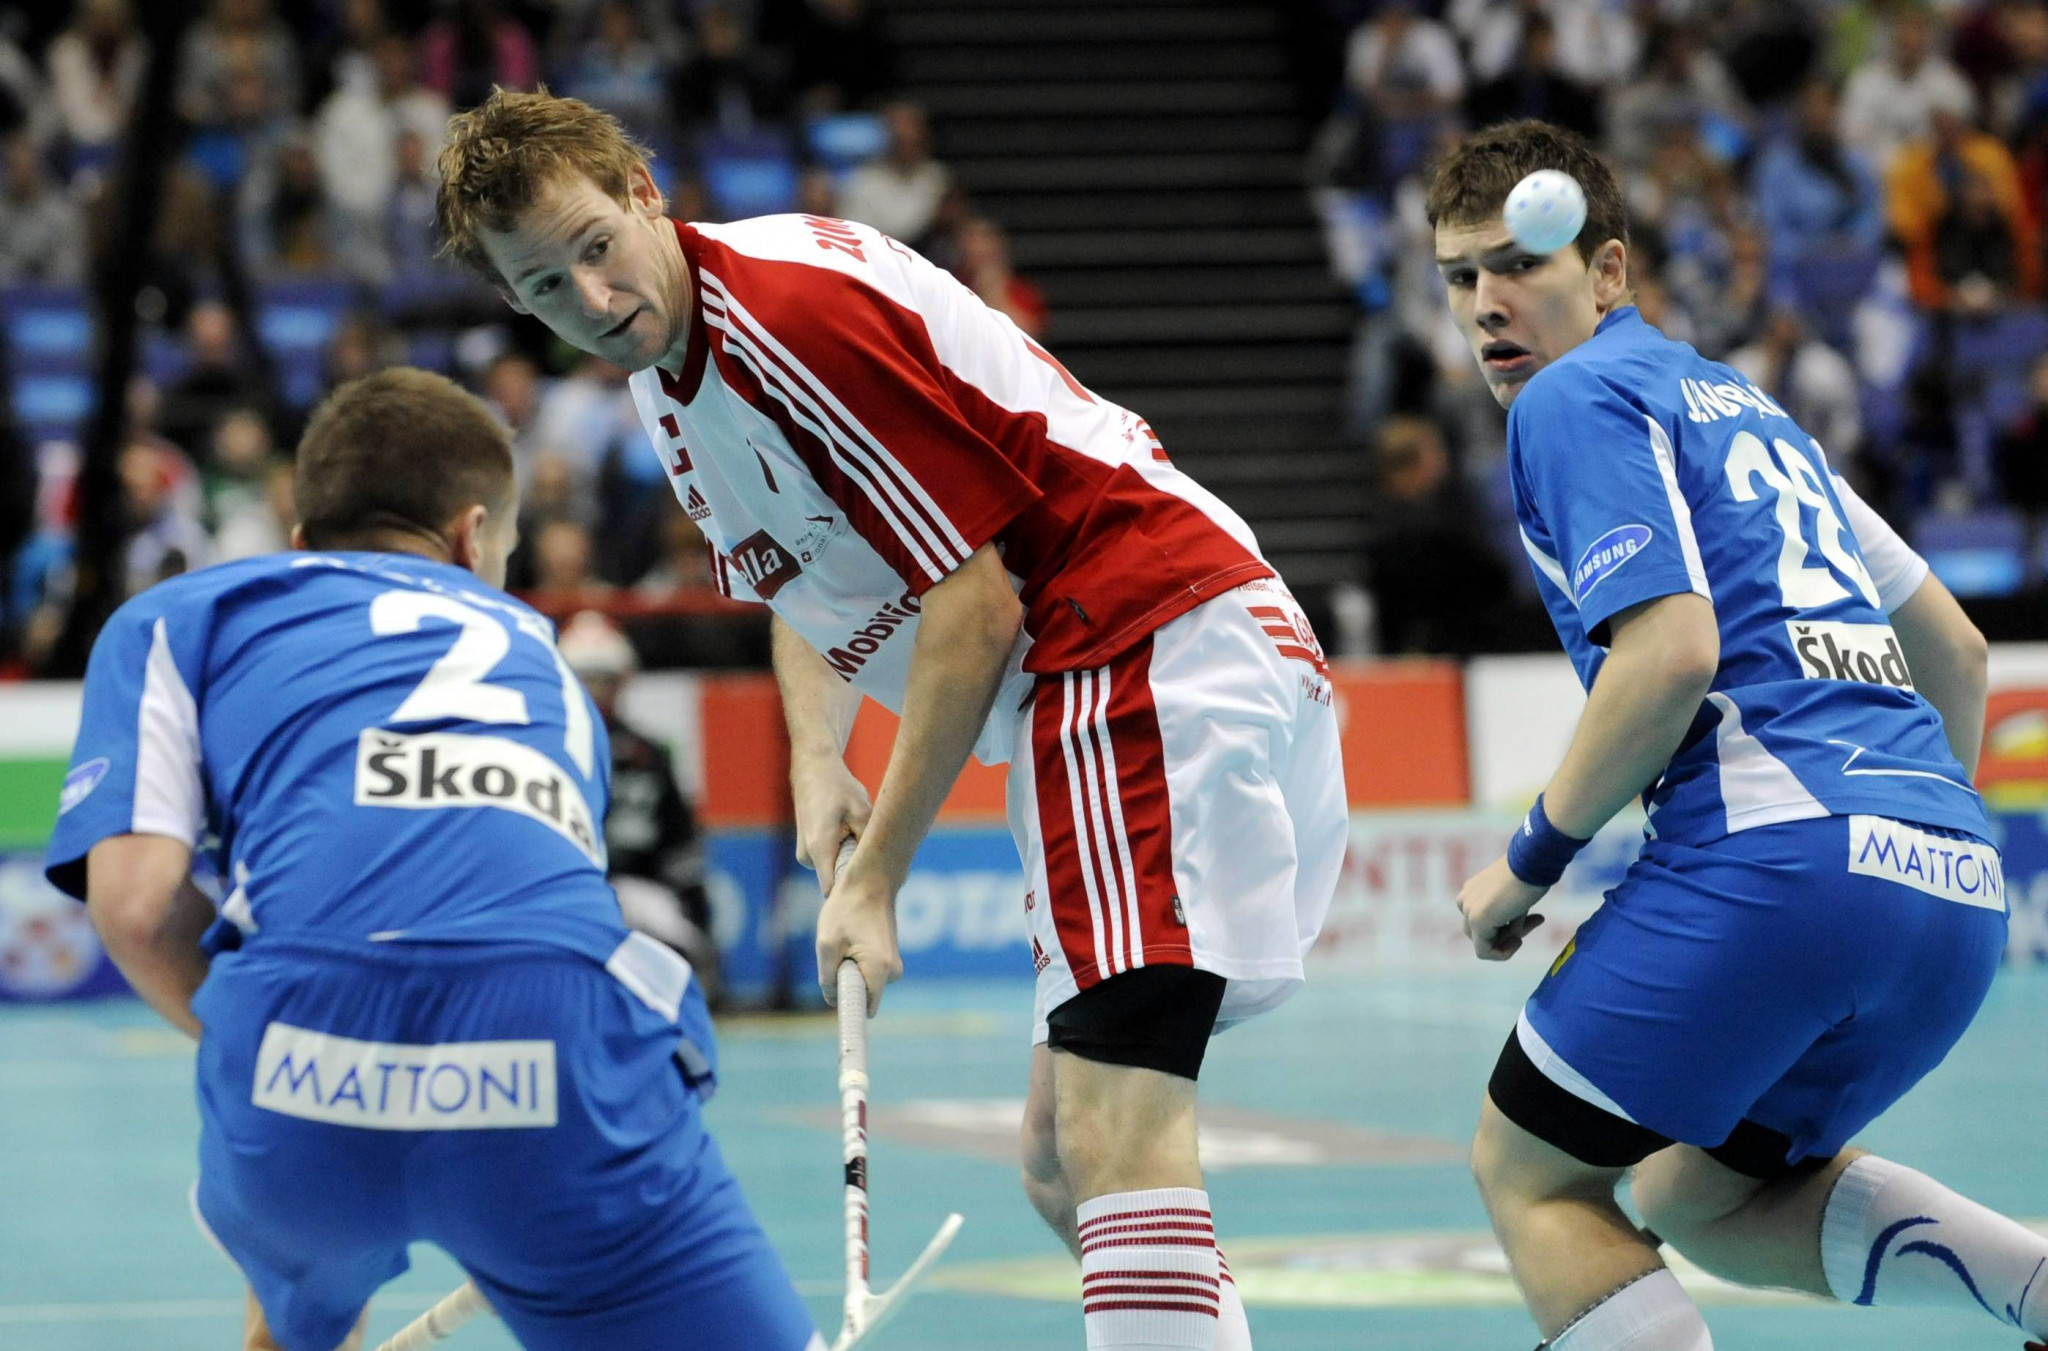 CONCORDIA's partnership with organisers of the 2022 Men's World Floorball Championships is set to enable schoolchildren to attend the event while also giving families an opportunity to try out the sport ©Getty Images